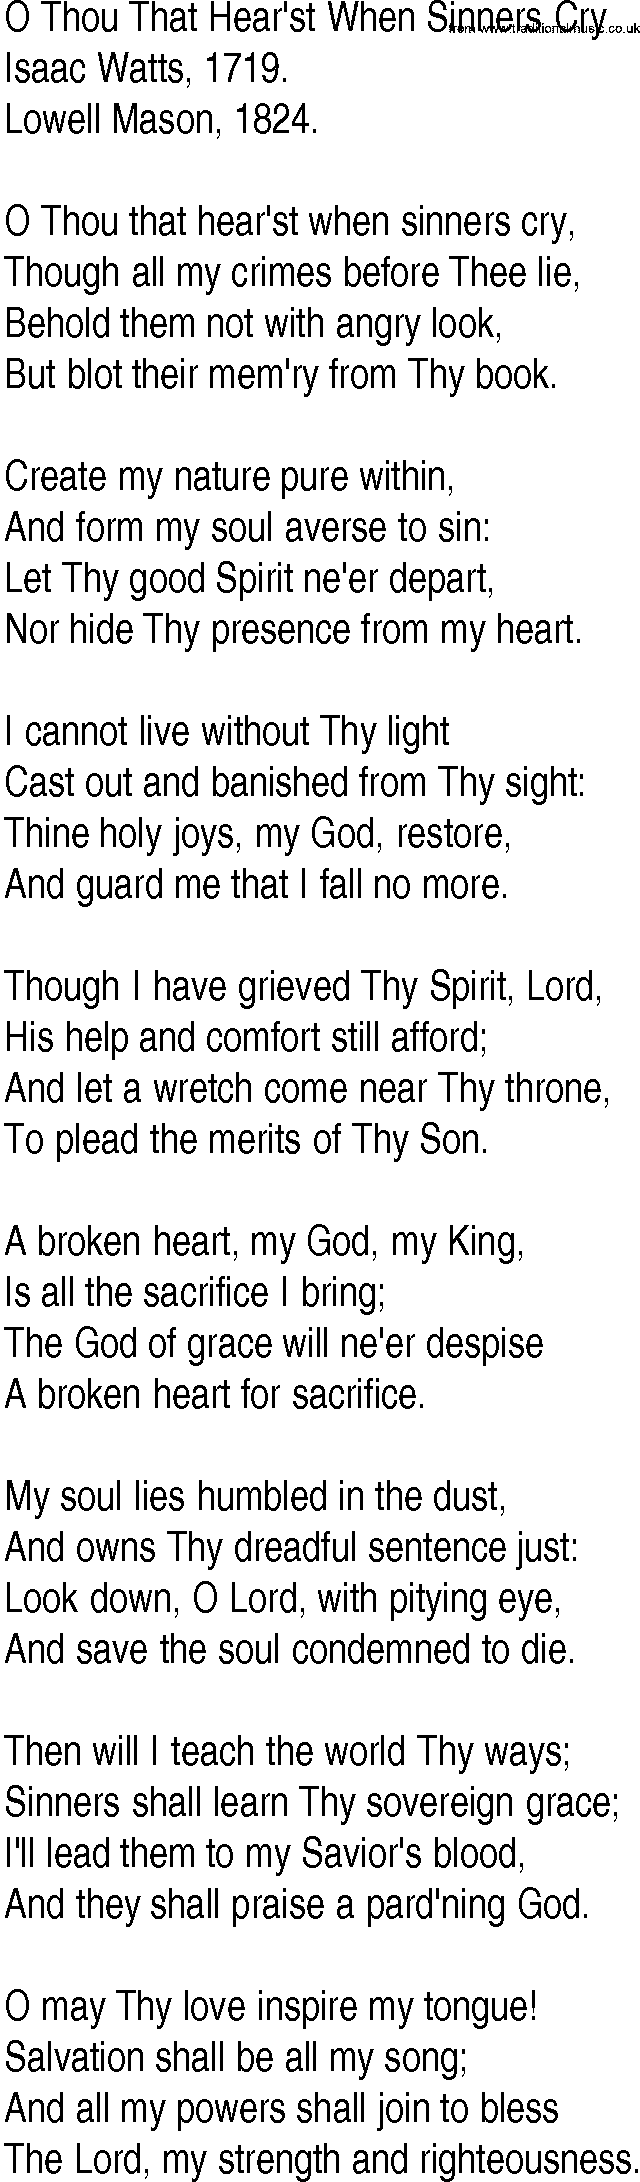 Hymn and Gospel Song: O Thou That Hear'st When Sinners Cry by Isaac Watts lyrics